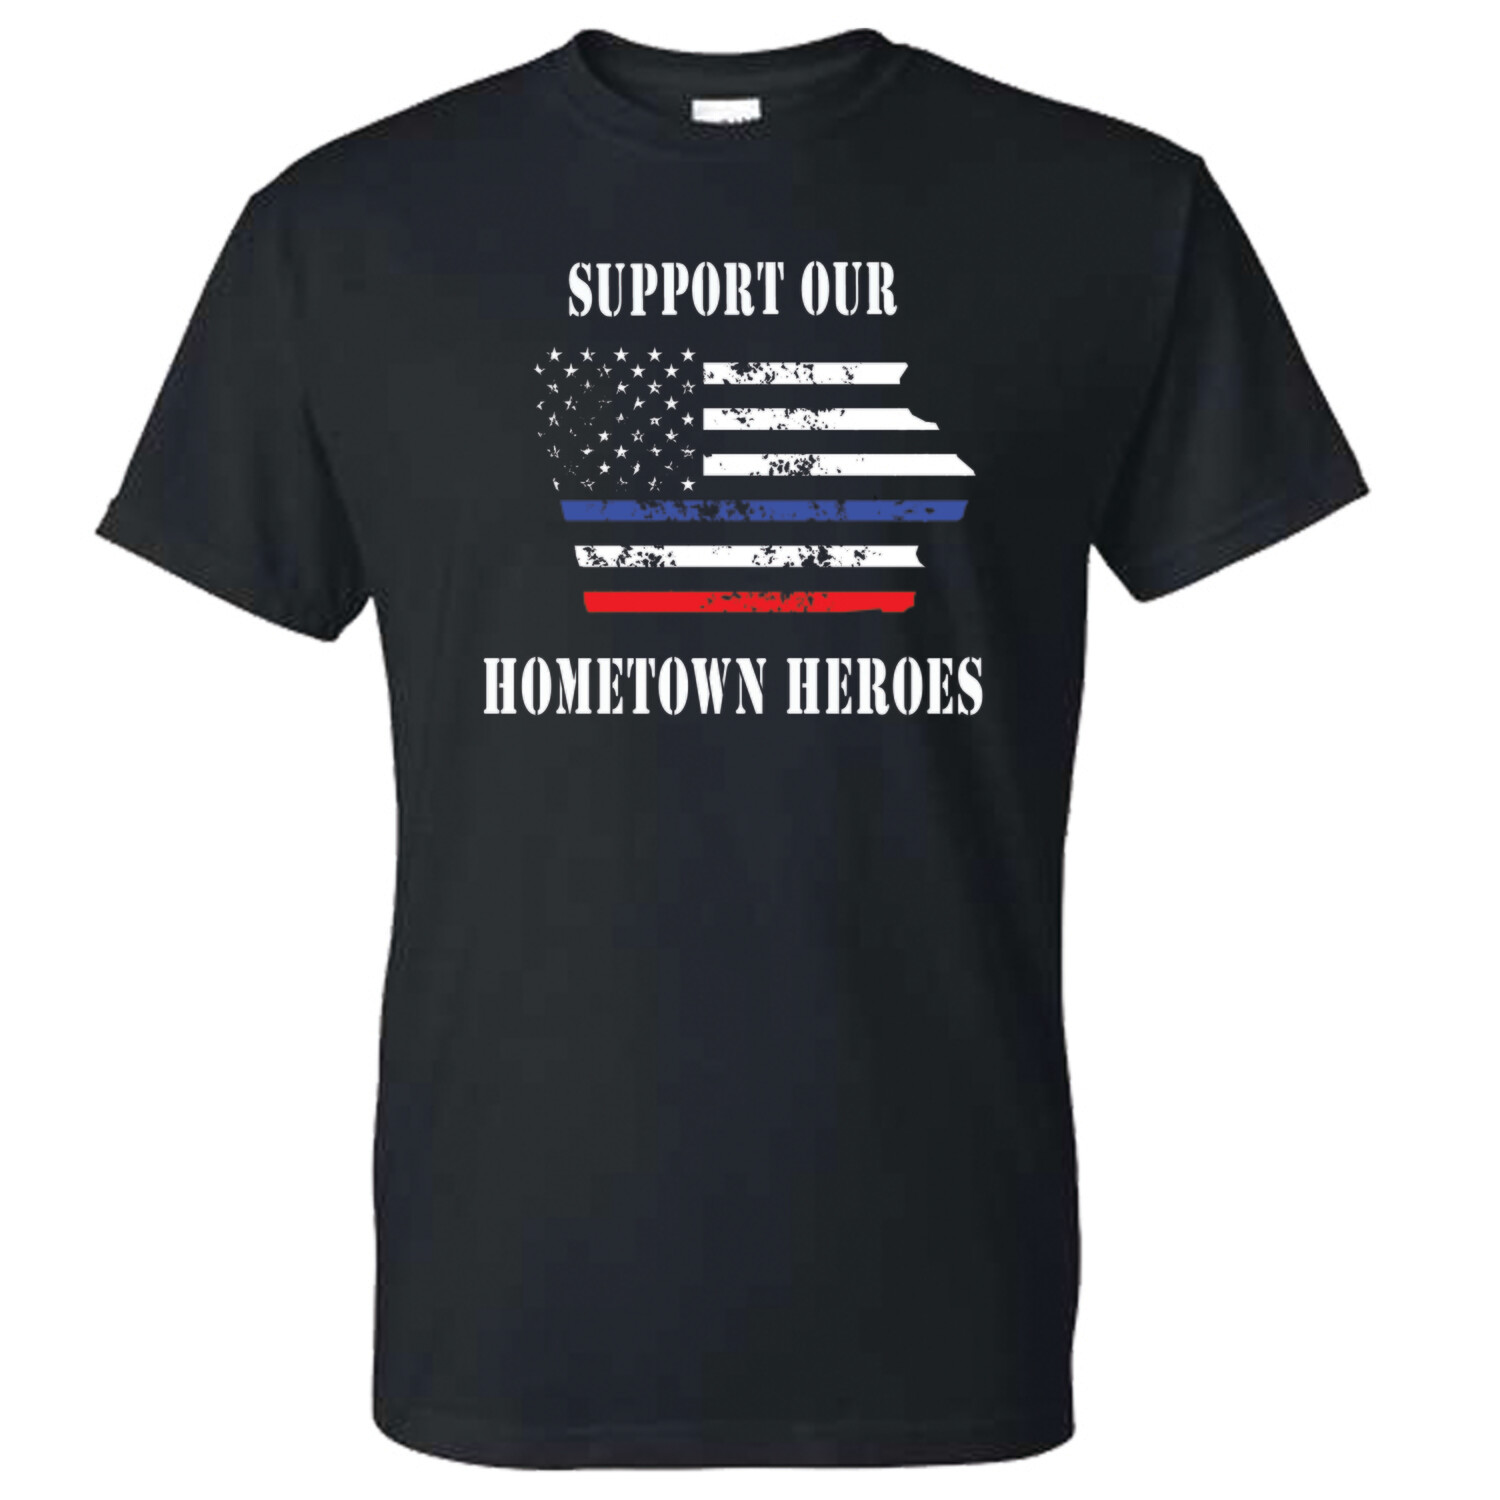 Support our hometown heroes T-Shirt